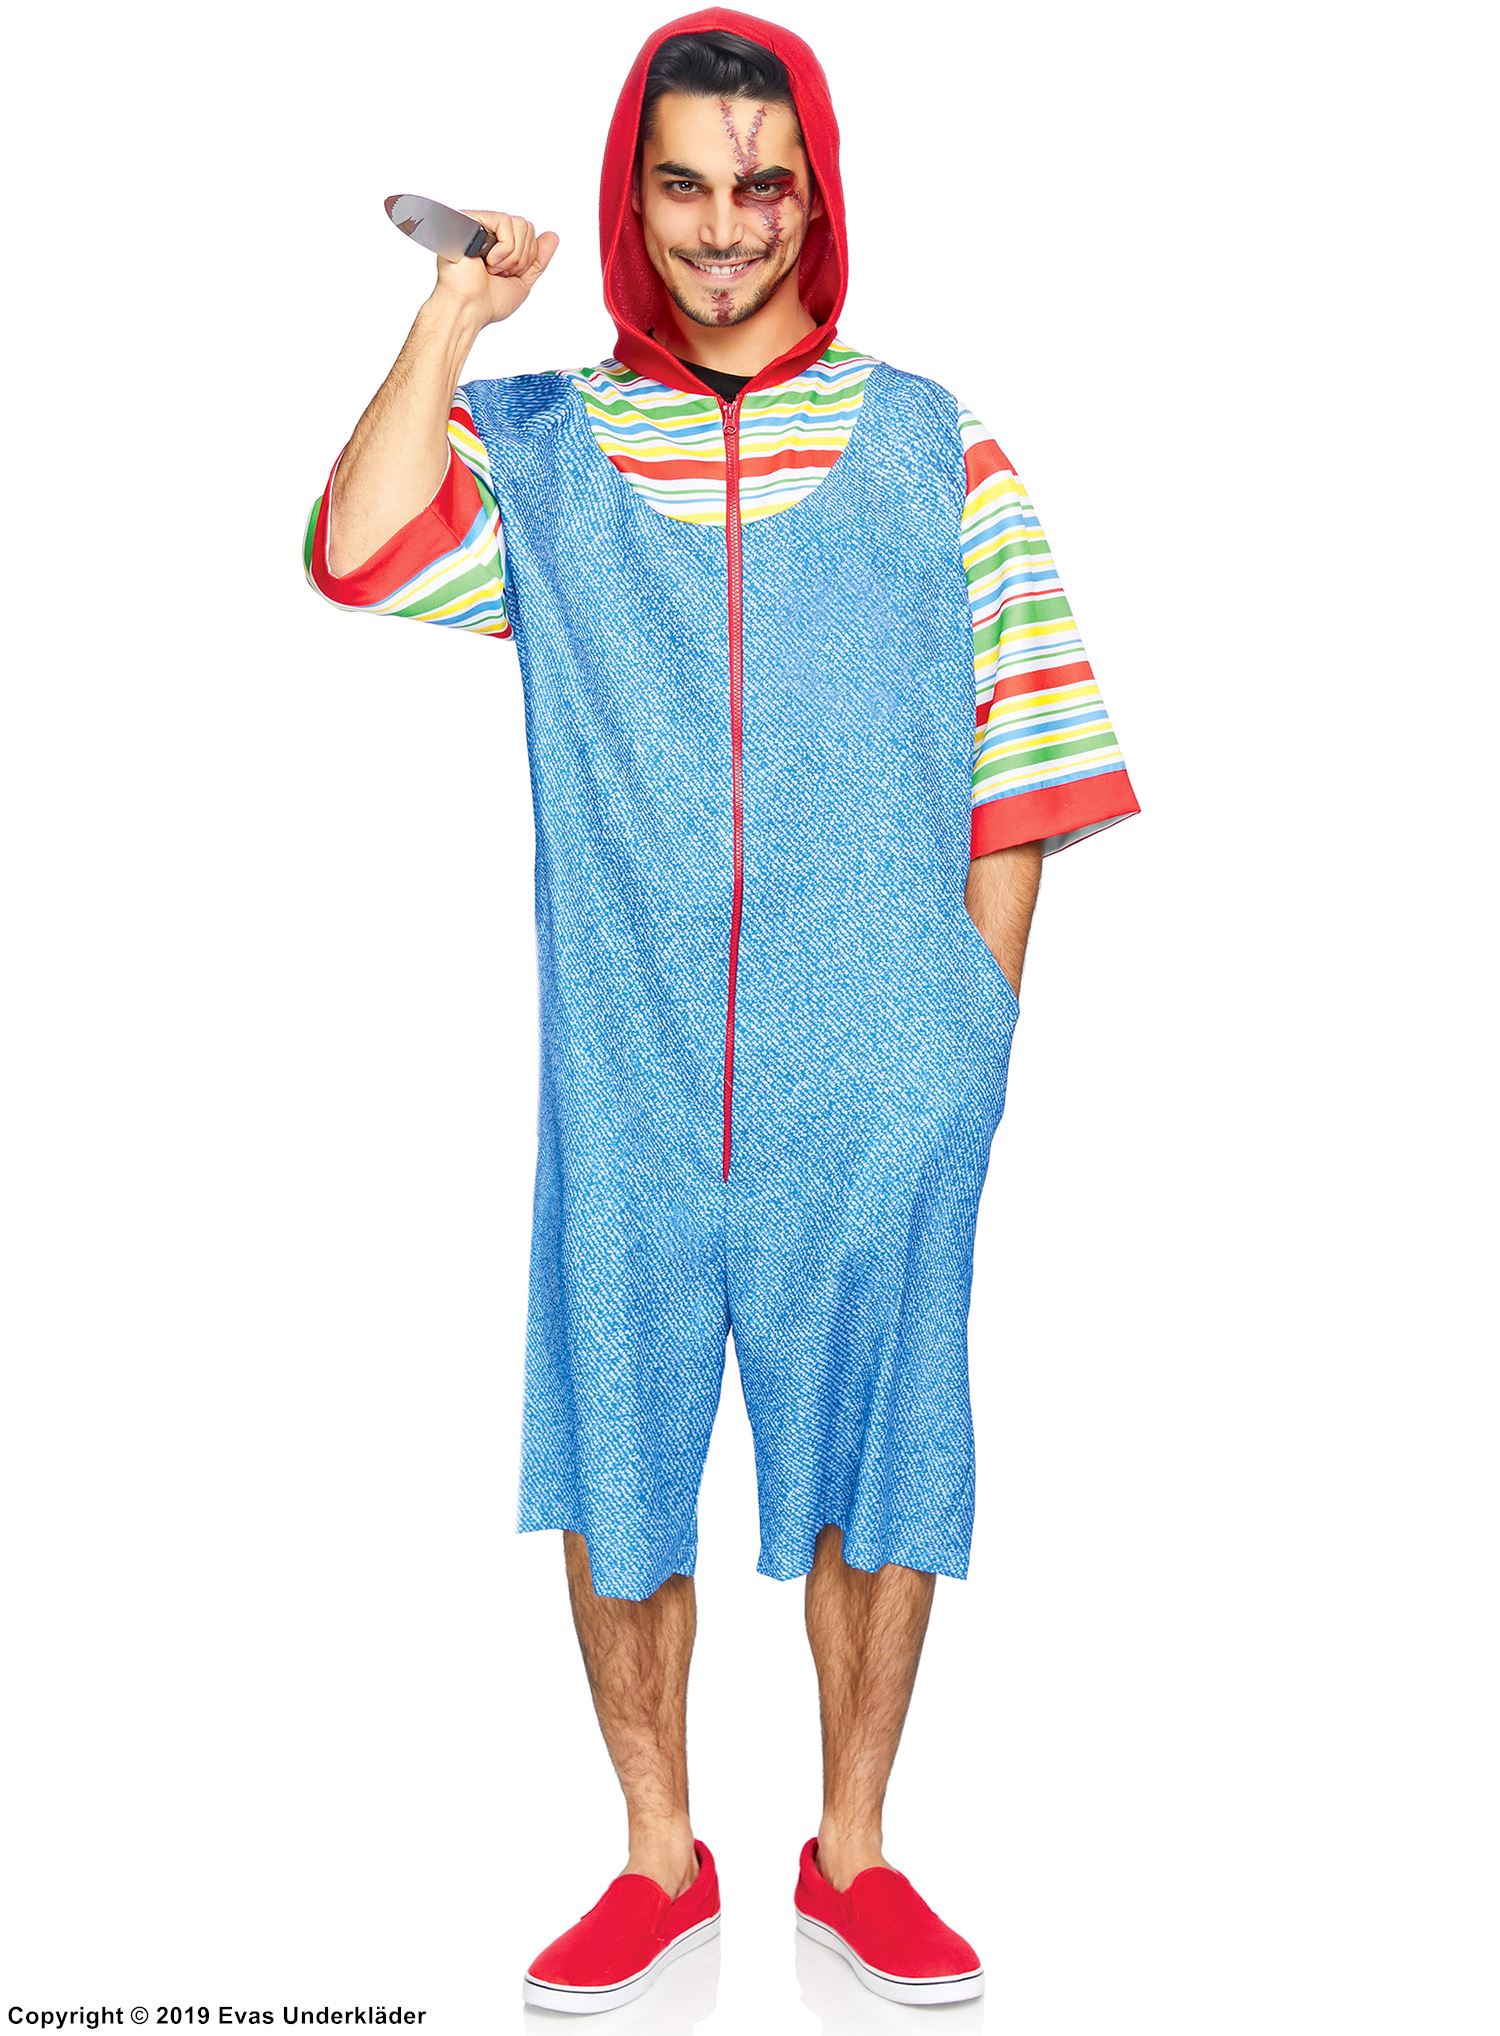 Chucky from Child's Play, jumpsuit costume, hood, front zipper, horizontal stripes